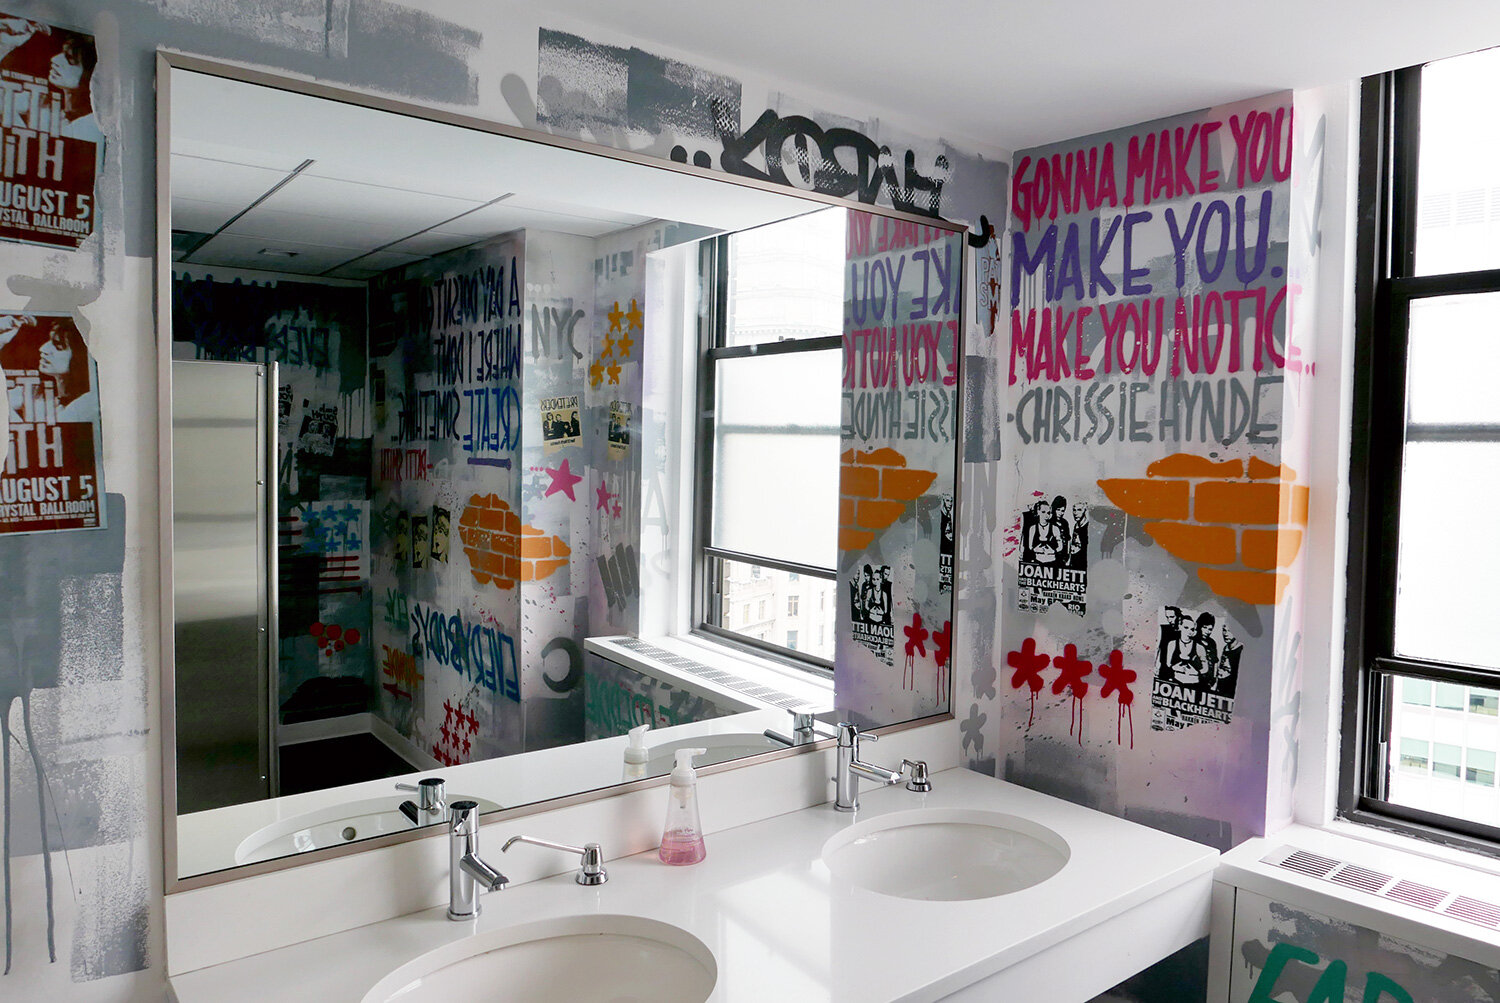 Graffiti your walls - do it yourself, ask your friends, or pick up wallpaper that has the look